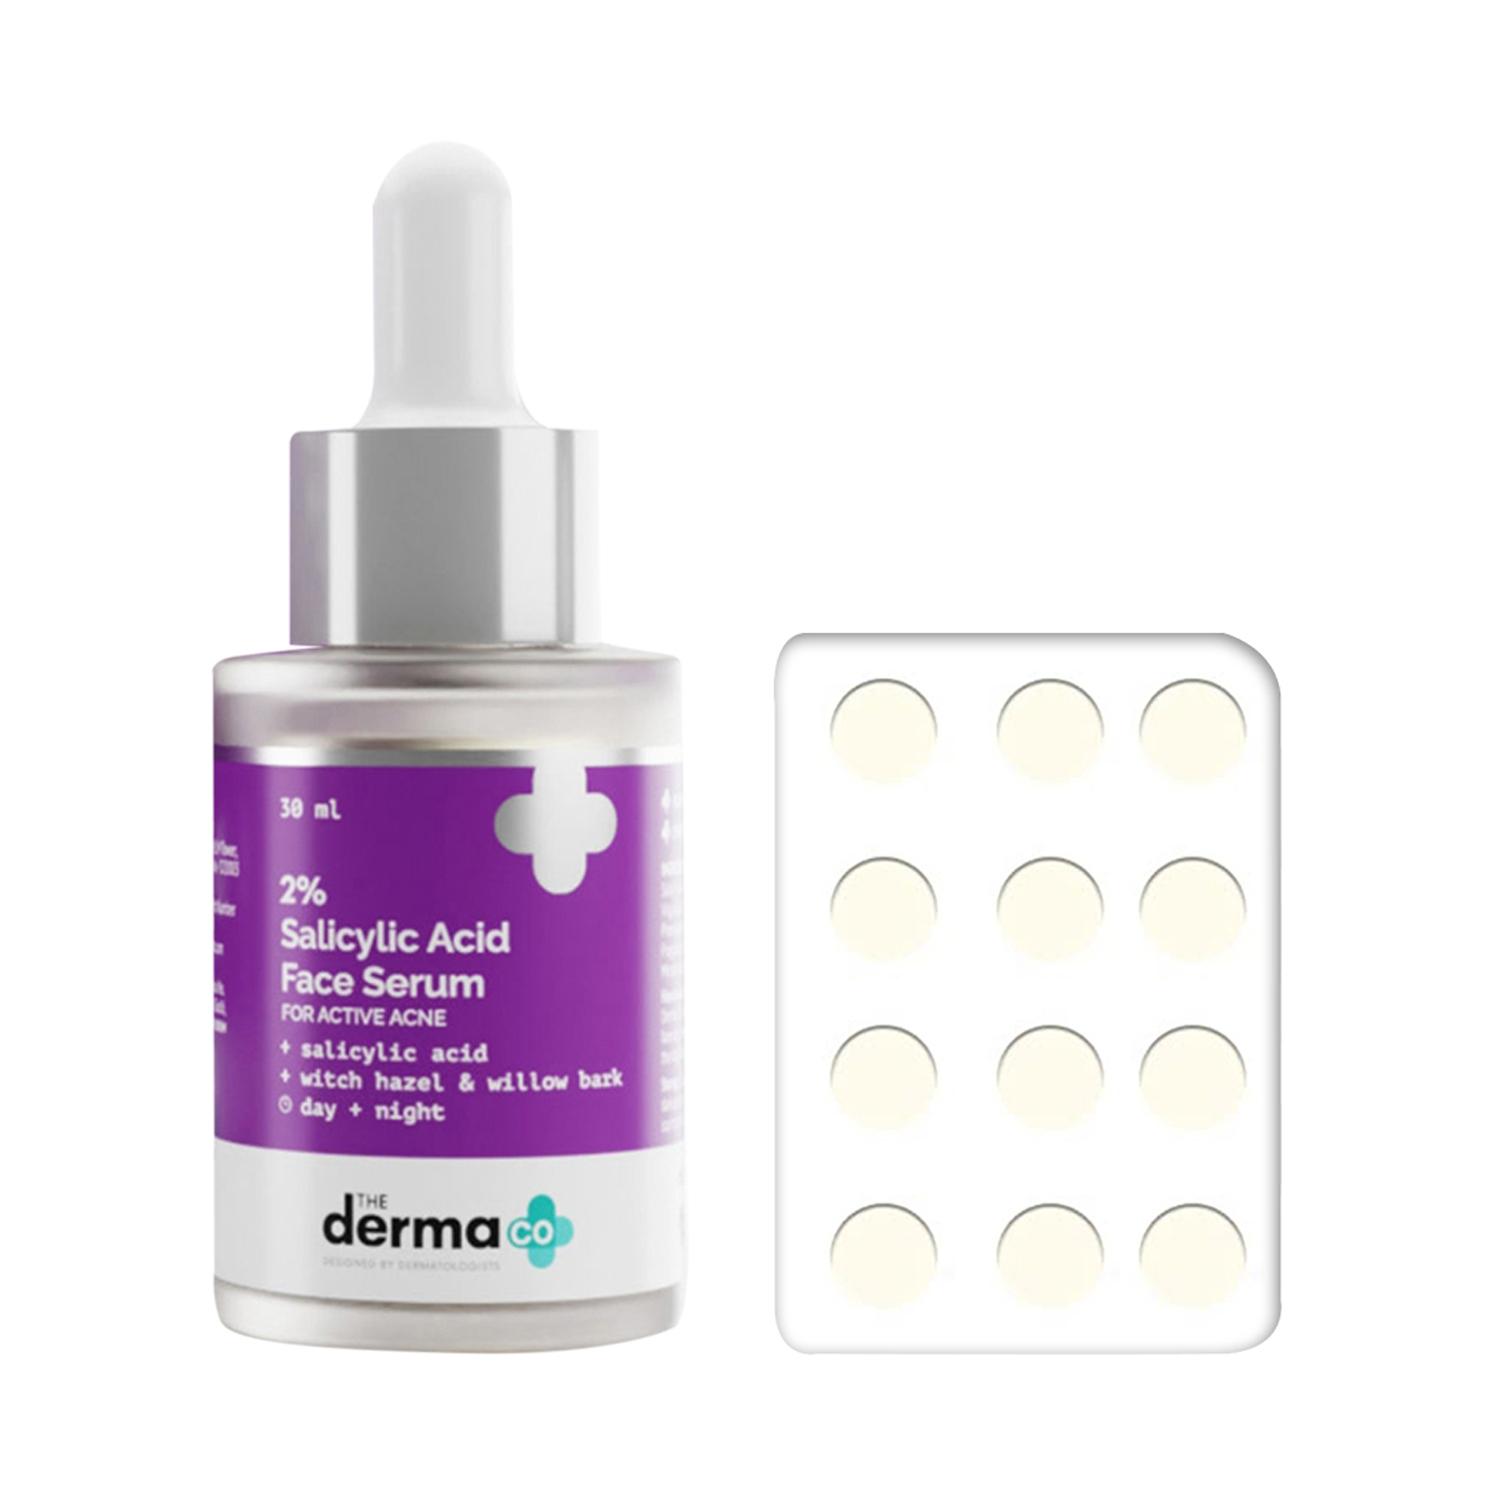 The Derma Co | The Derma Co. Anti-Acne Serum & Patches Combo